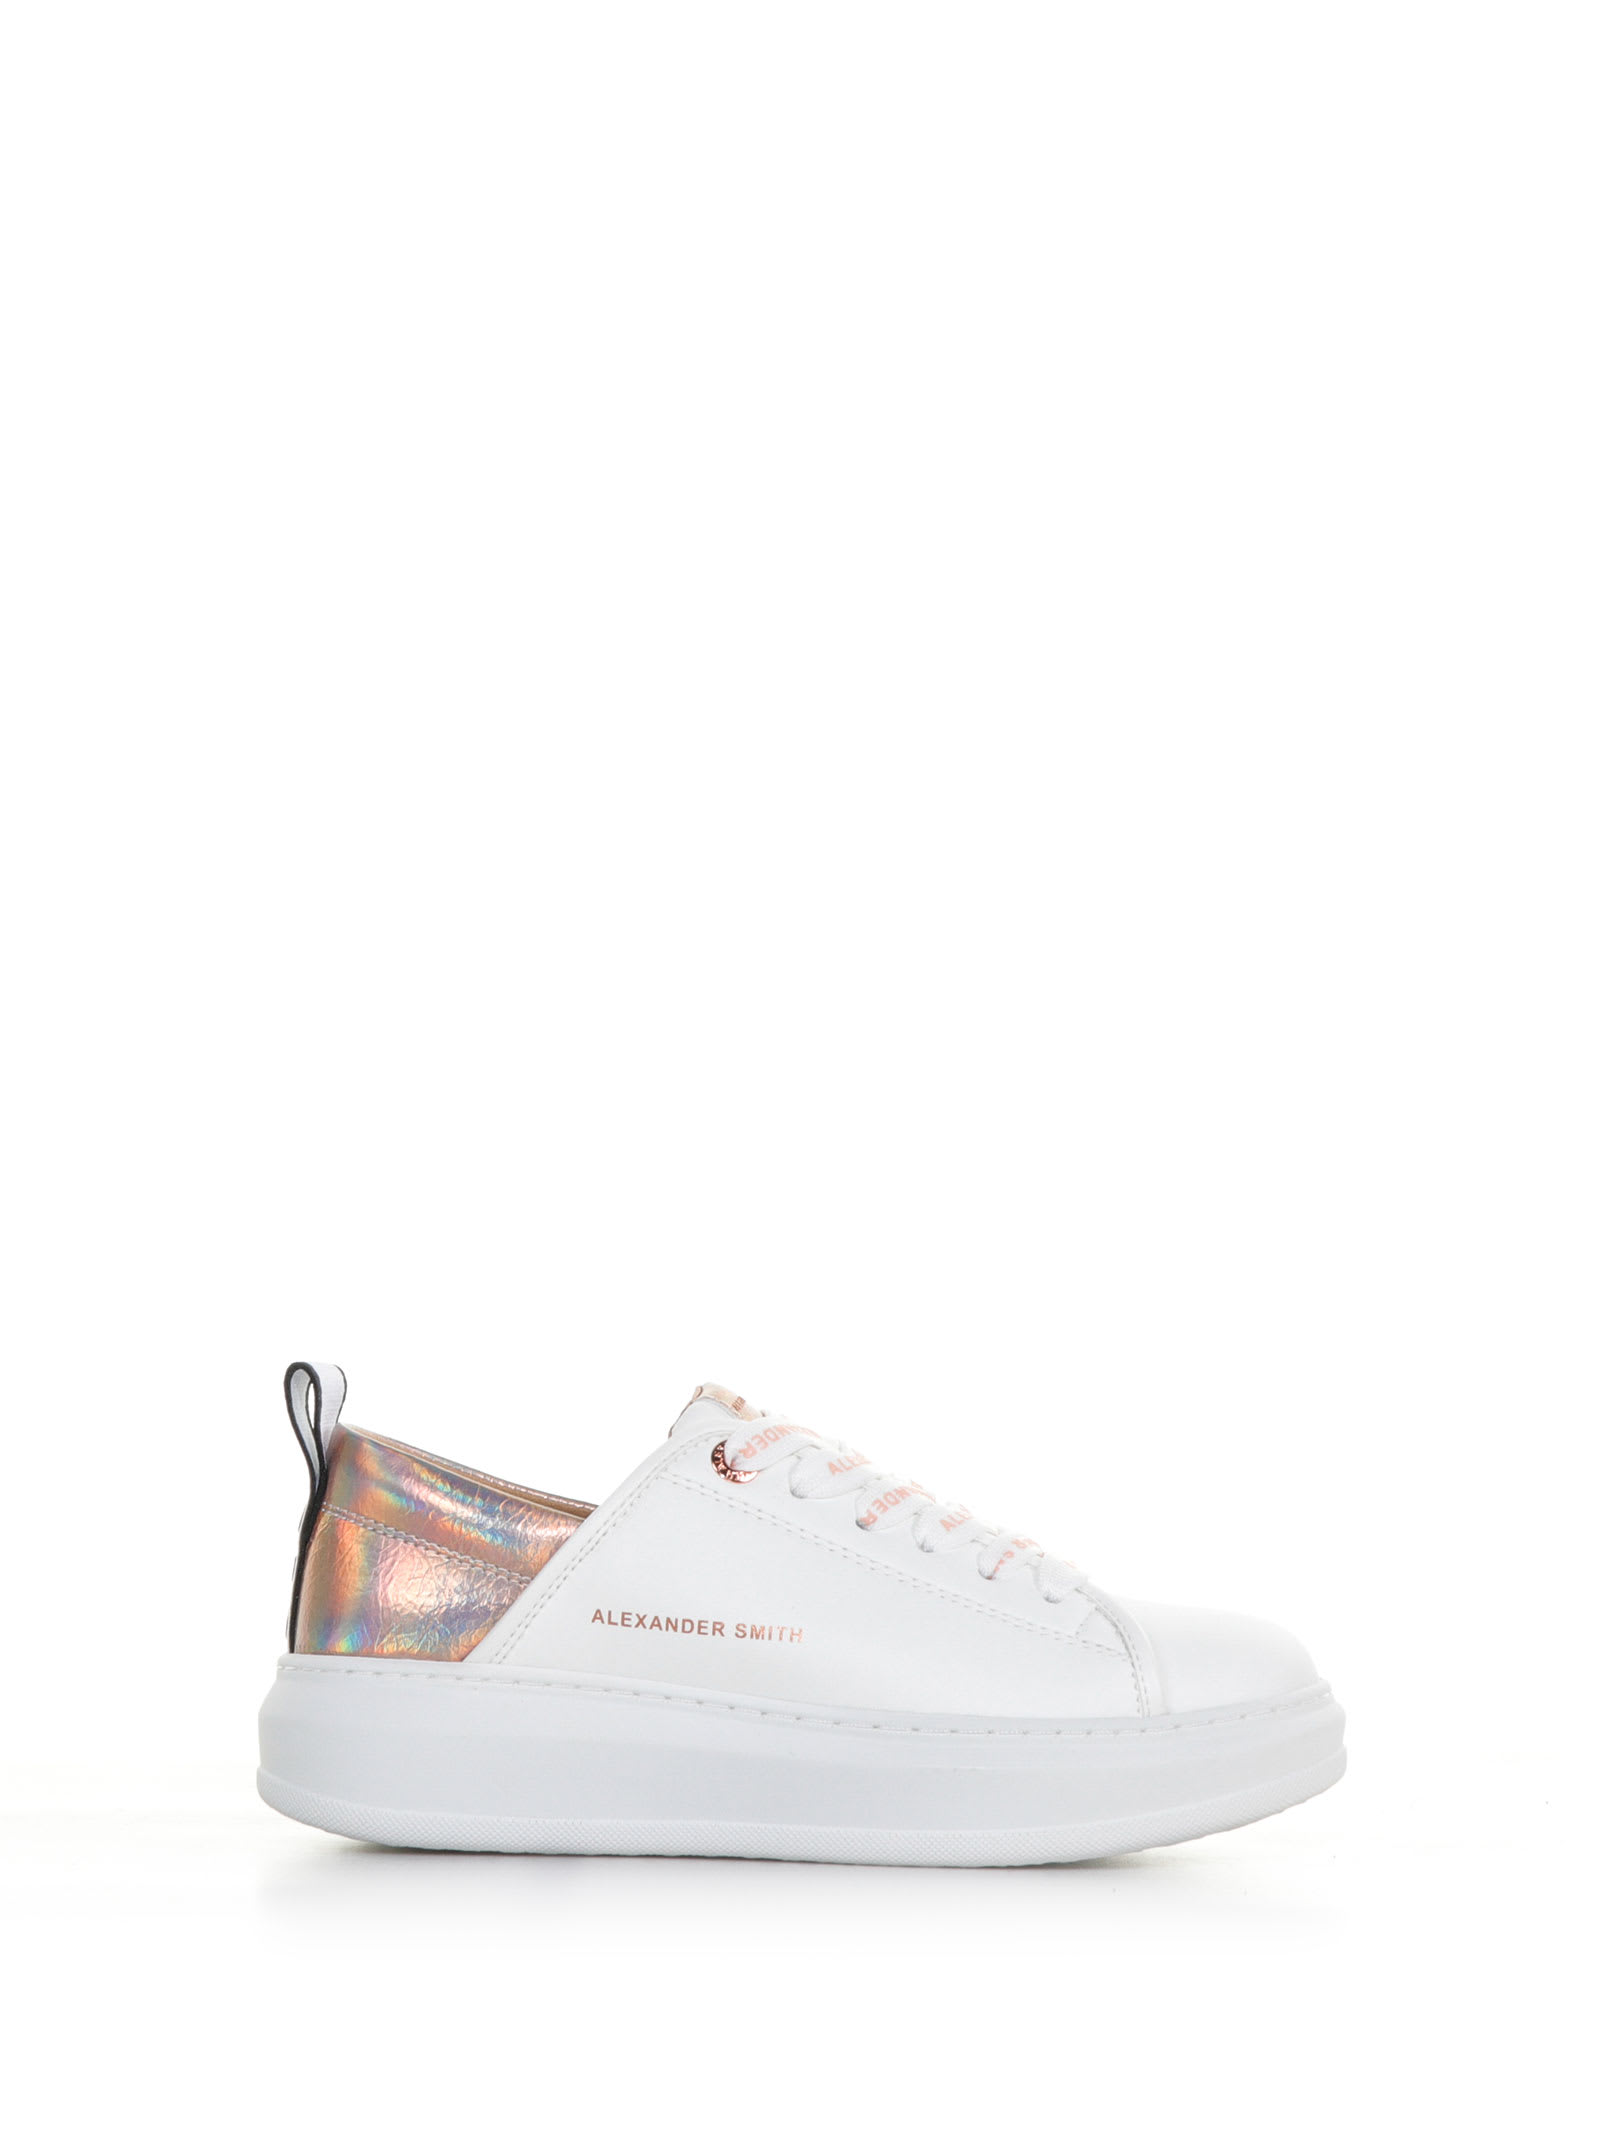 Alexander Smith Sneakers In Leather And Rose Gold Heel In Bianco Rose Gold